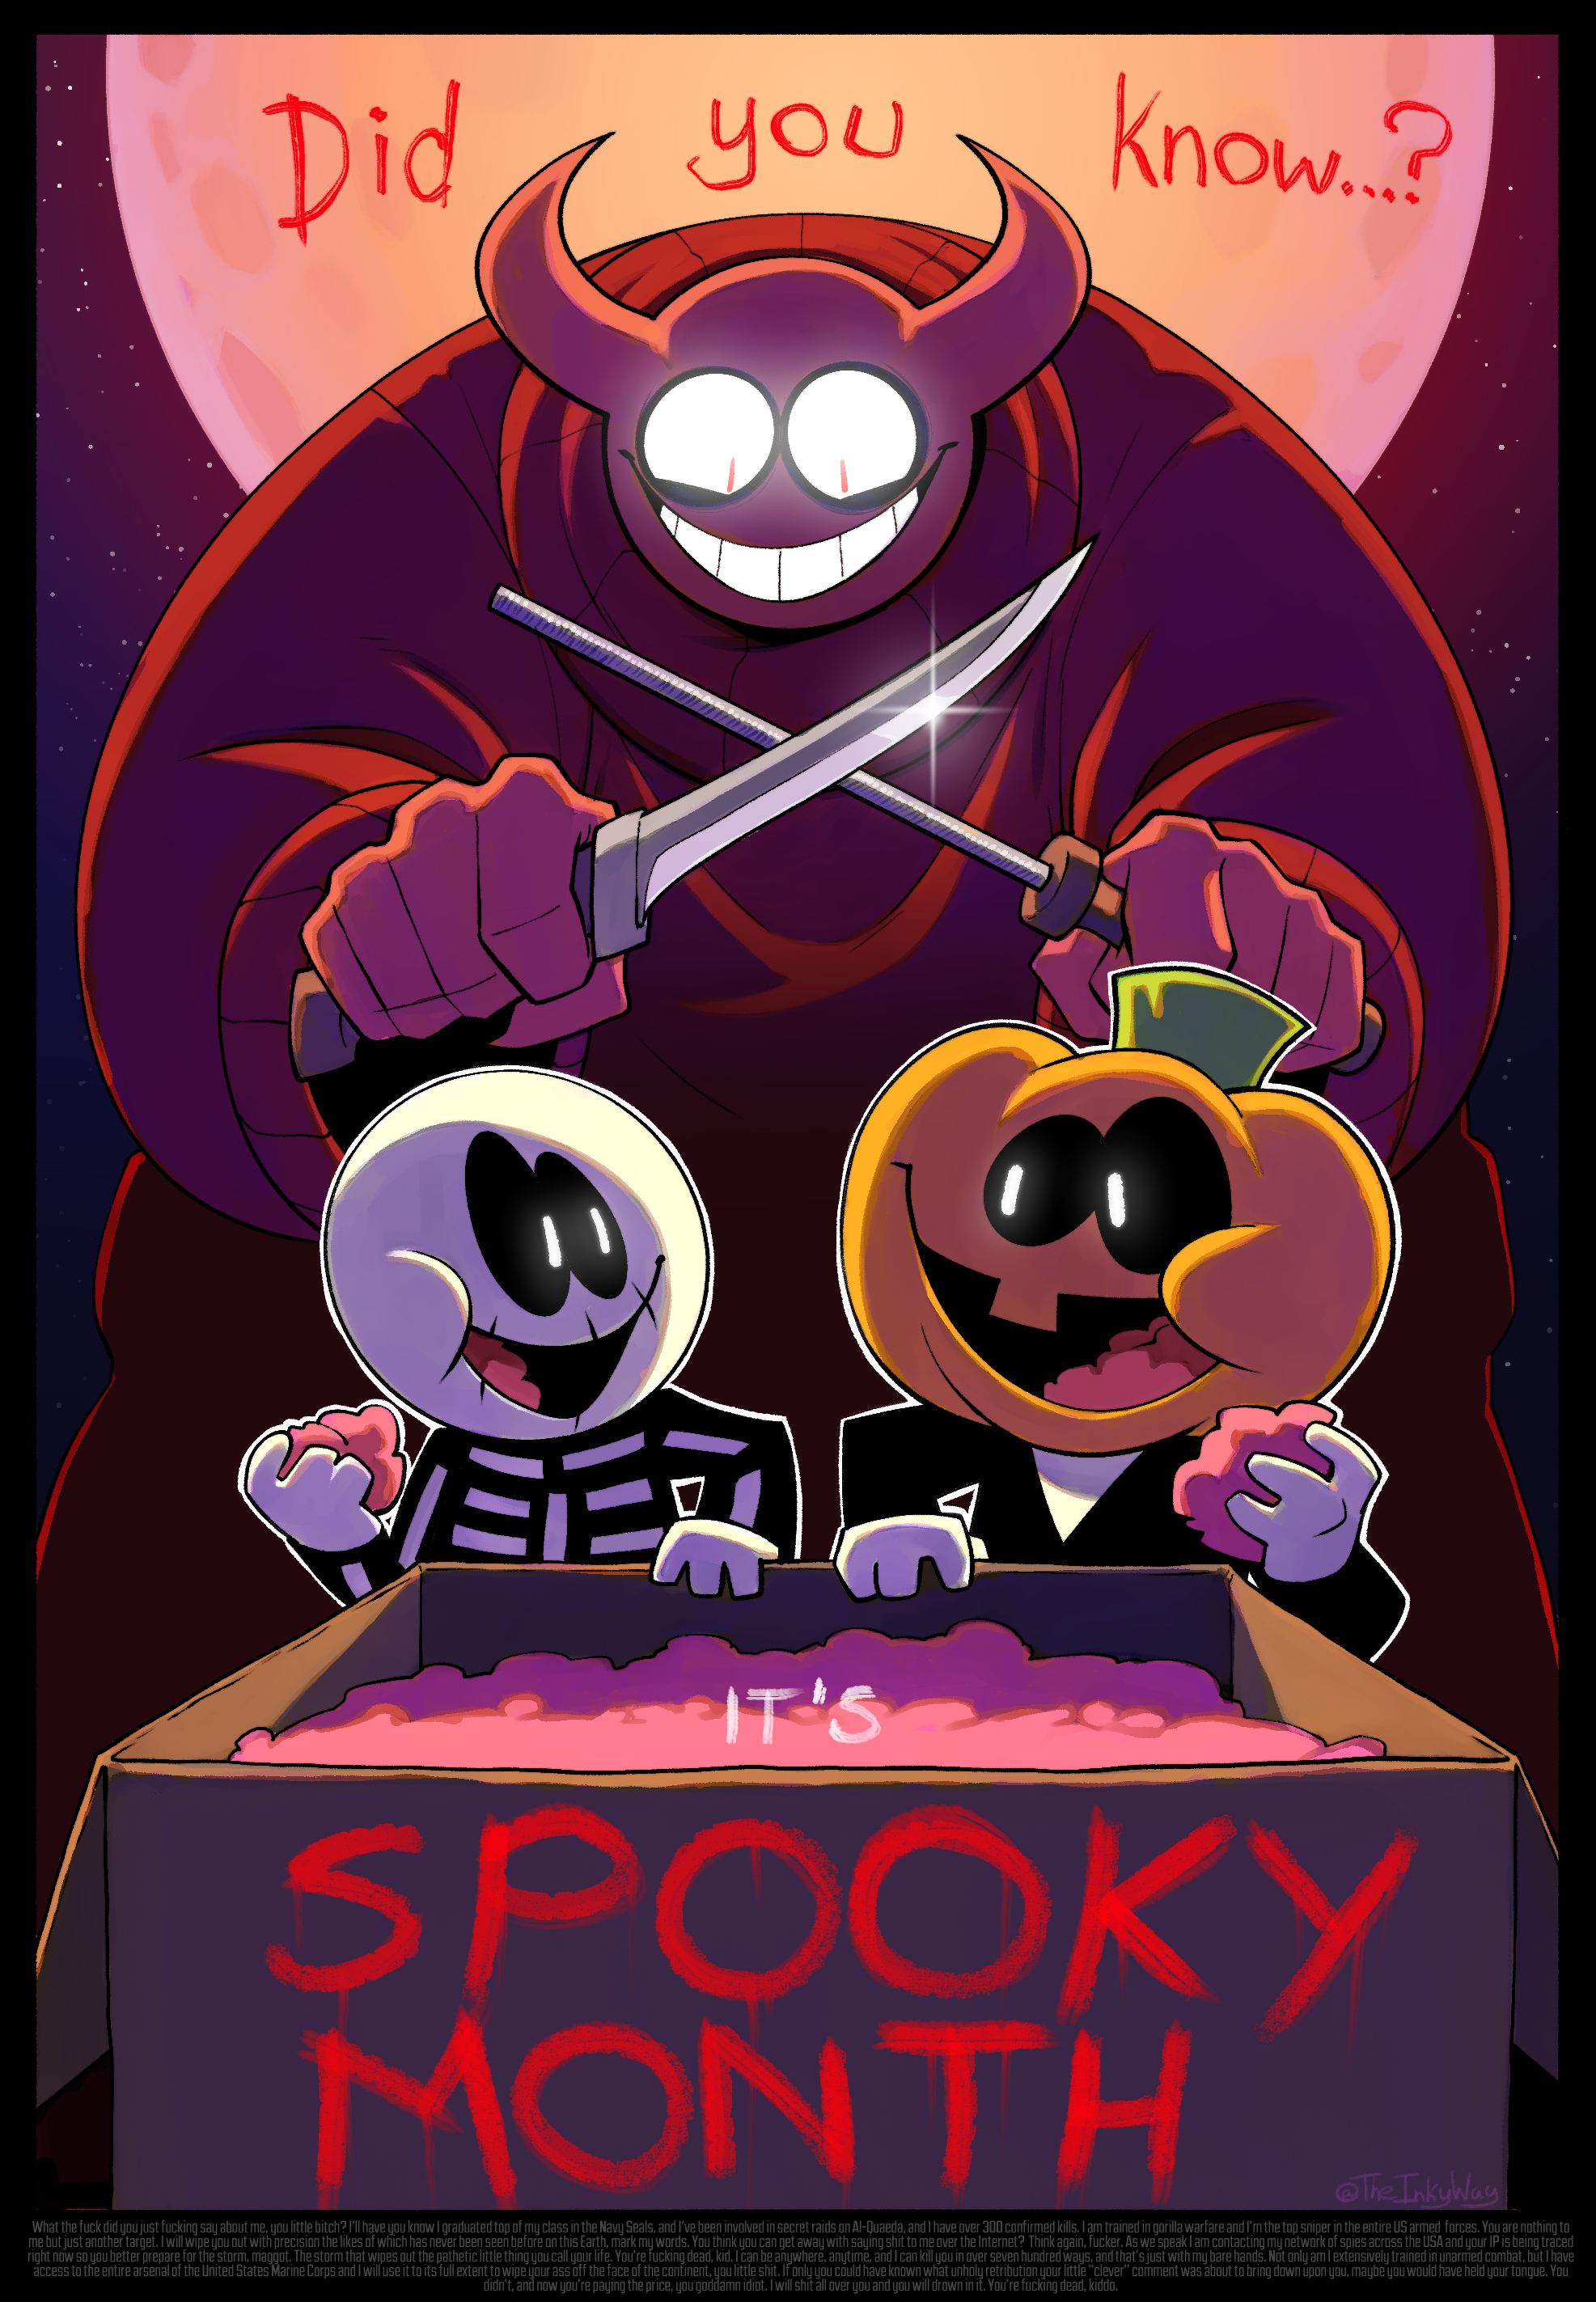 DID YOU KNOW? (Spooky Month Fan Art) by TheInkyWay on DeviantArt